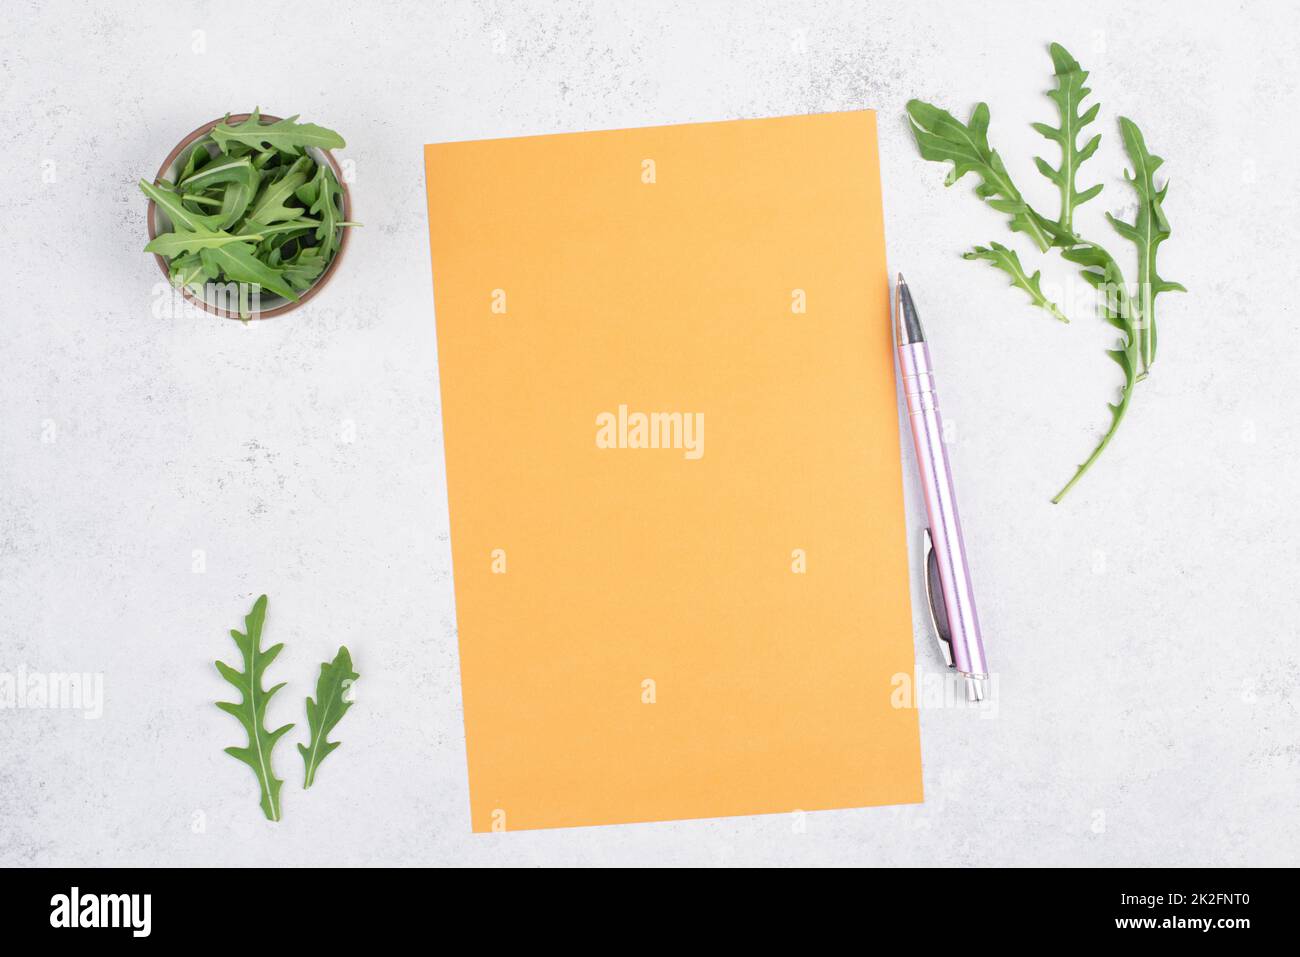 Blank colored paper with a pen, arugula salad leaves, copy space for text, recipe for cooking, preparing food, healthy lifestyle, diet Stock Photo